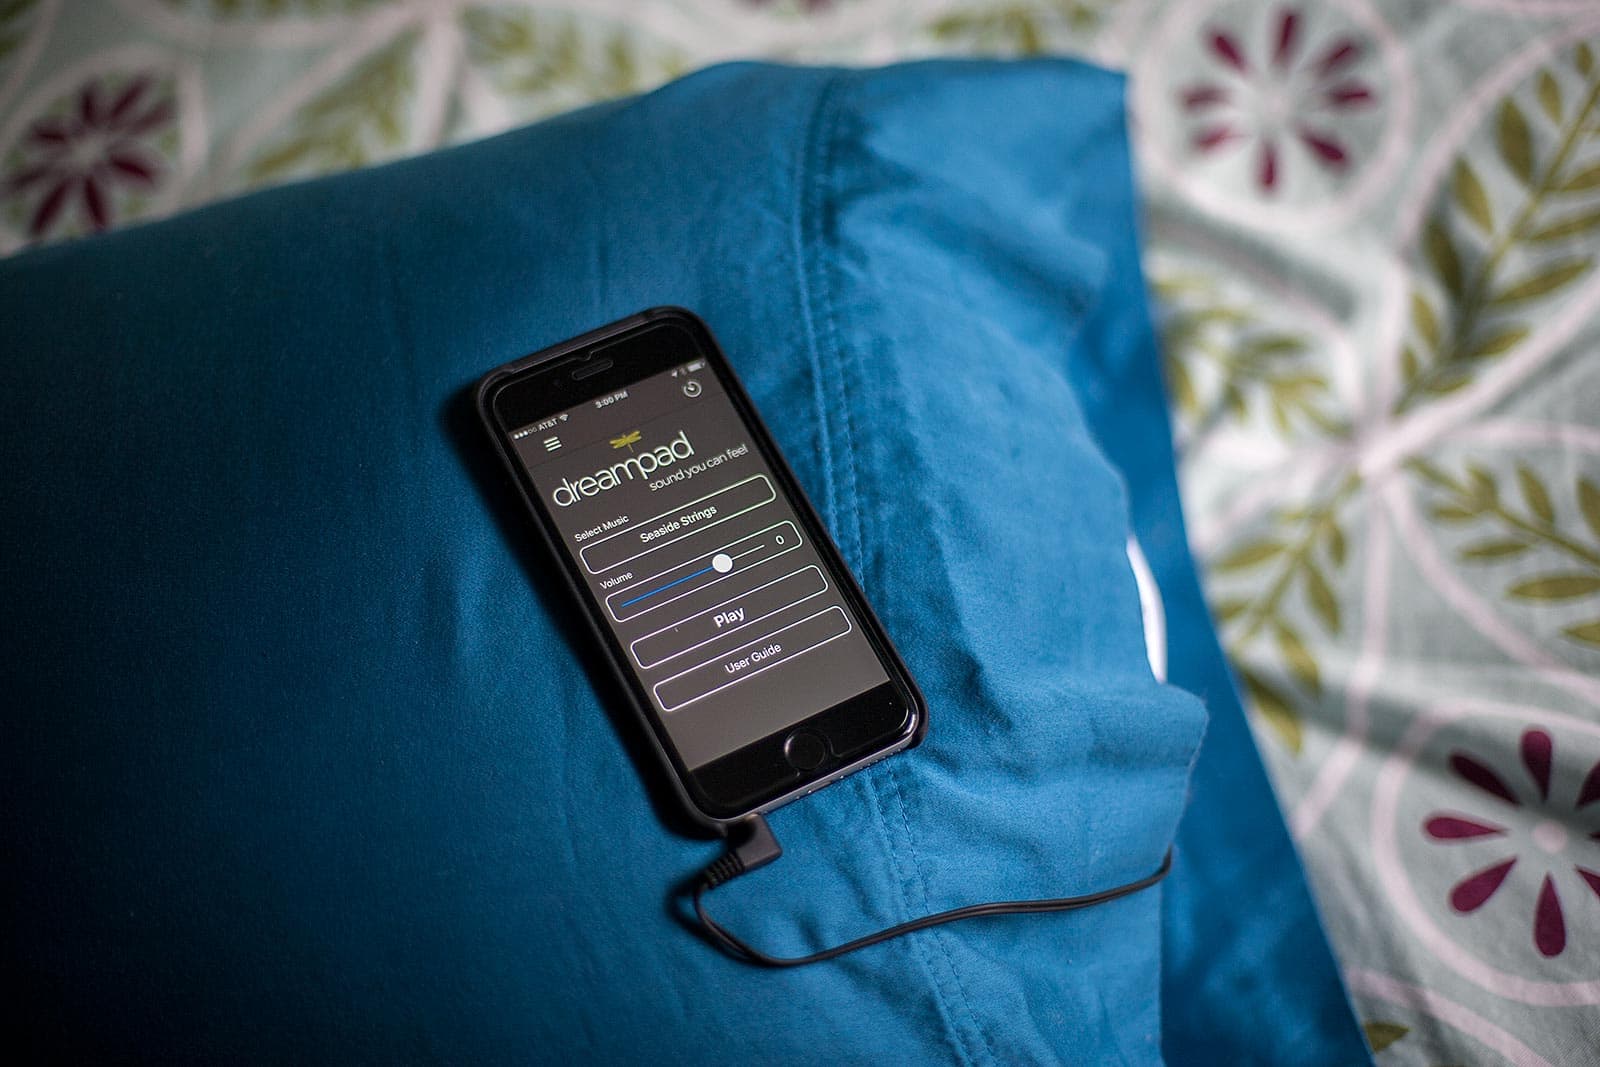 Dreampad is a pillow that joins forces with your iPhones to help you sleep.